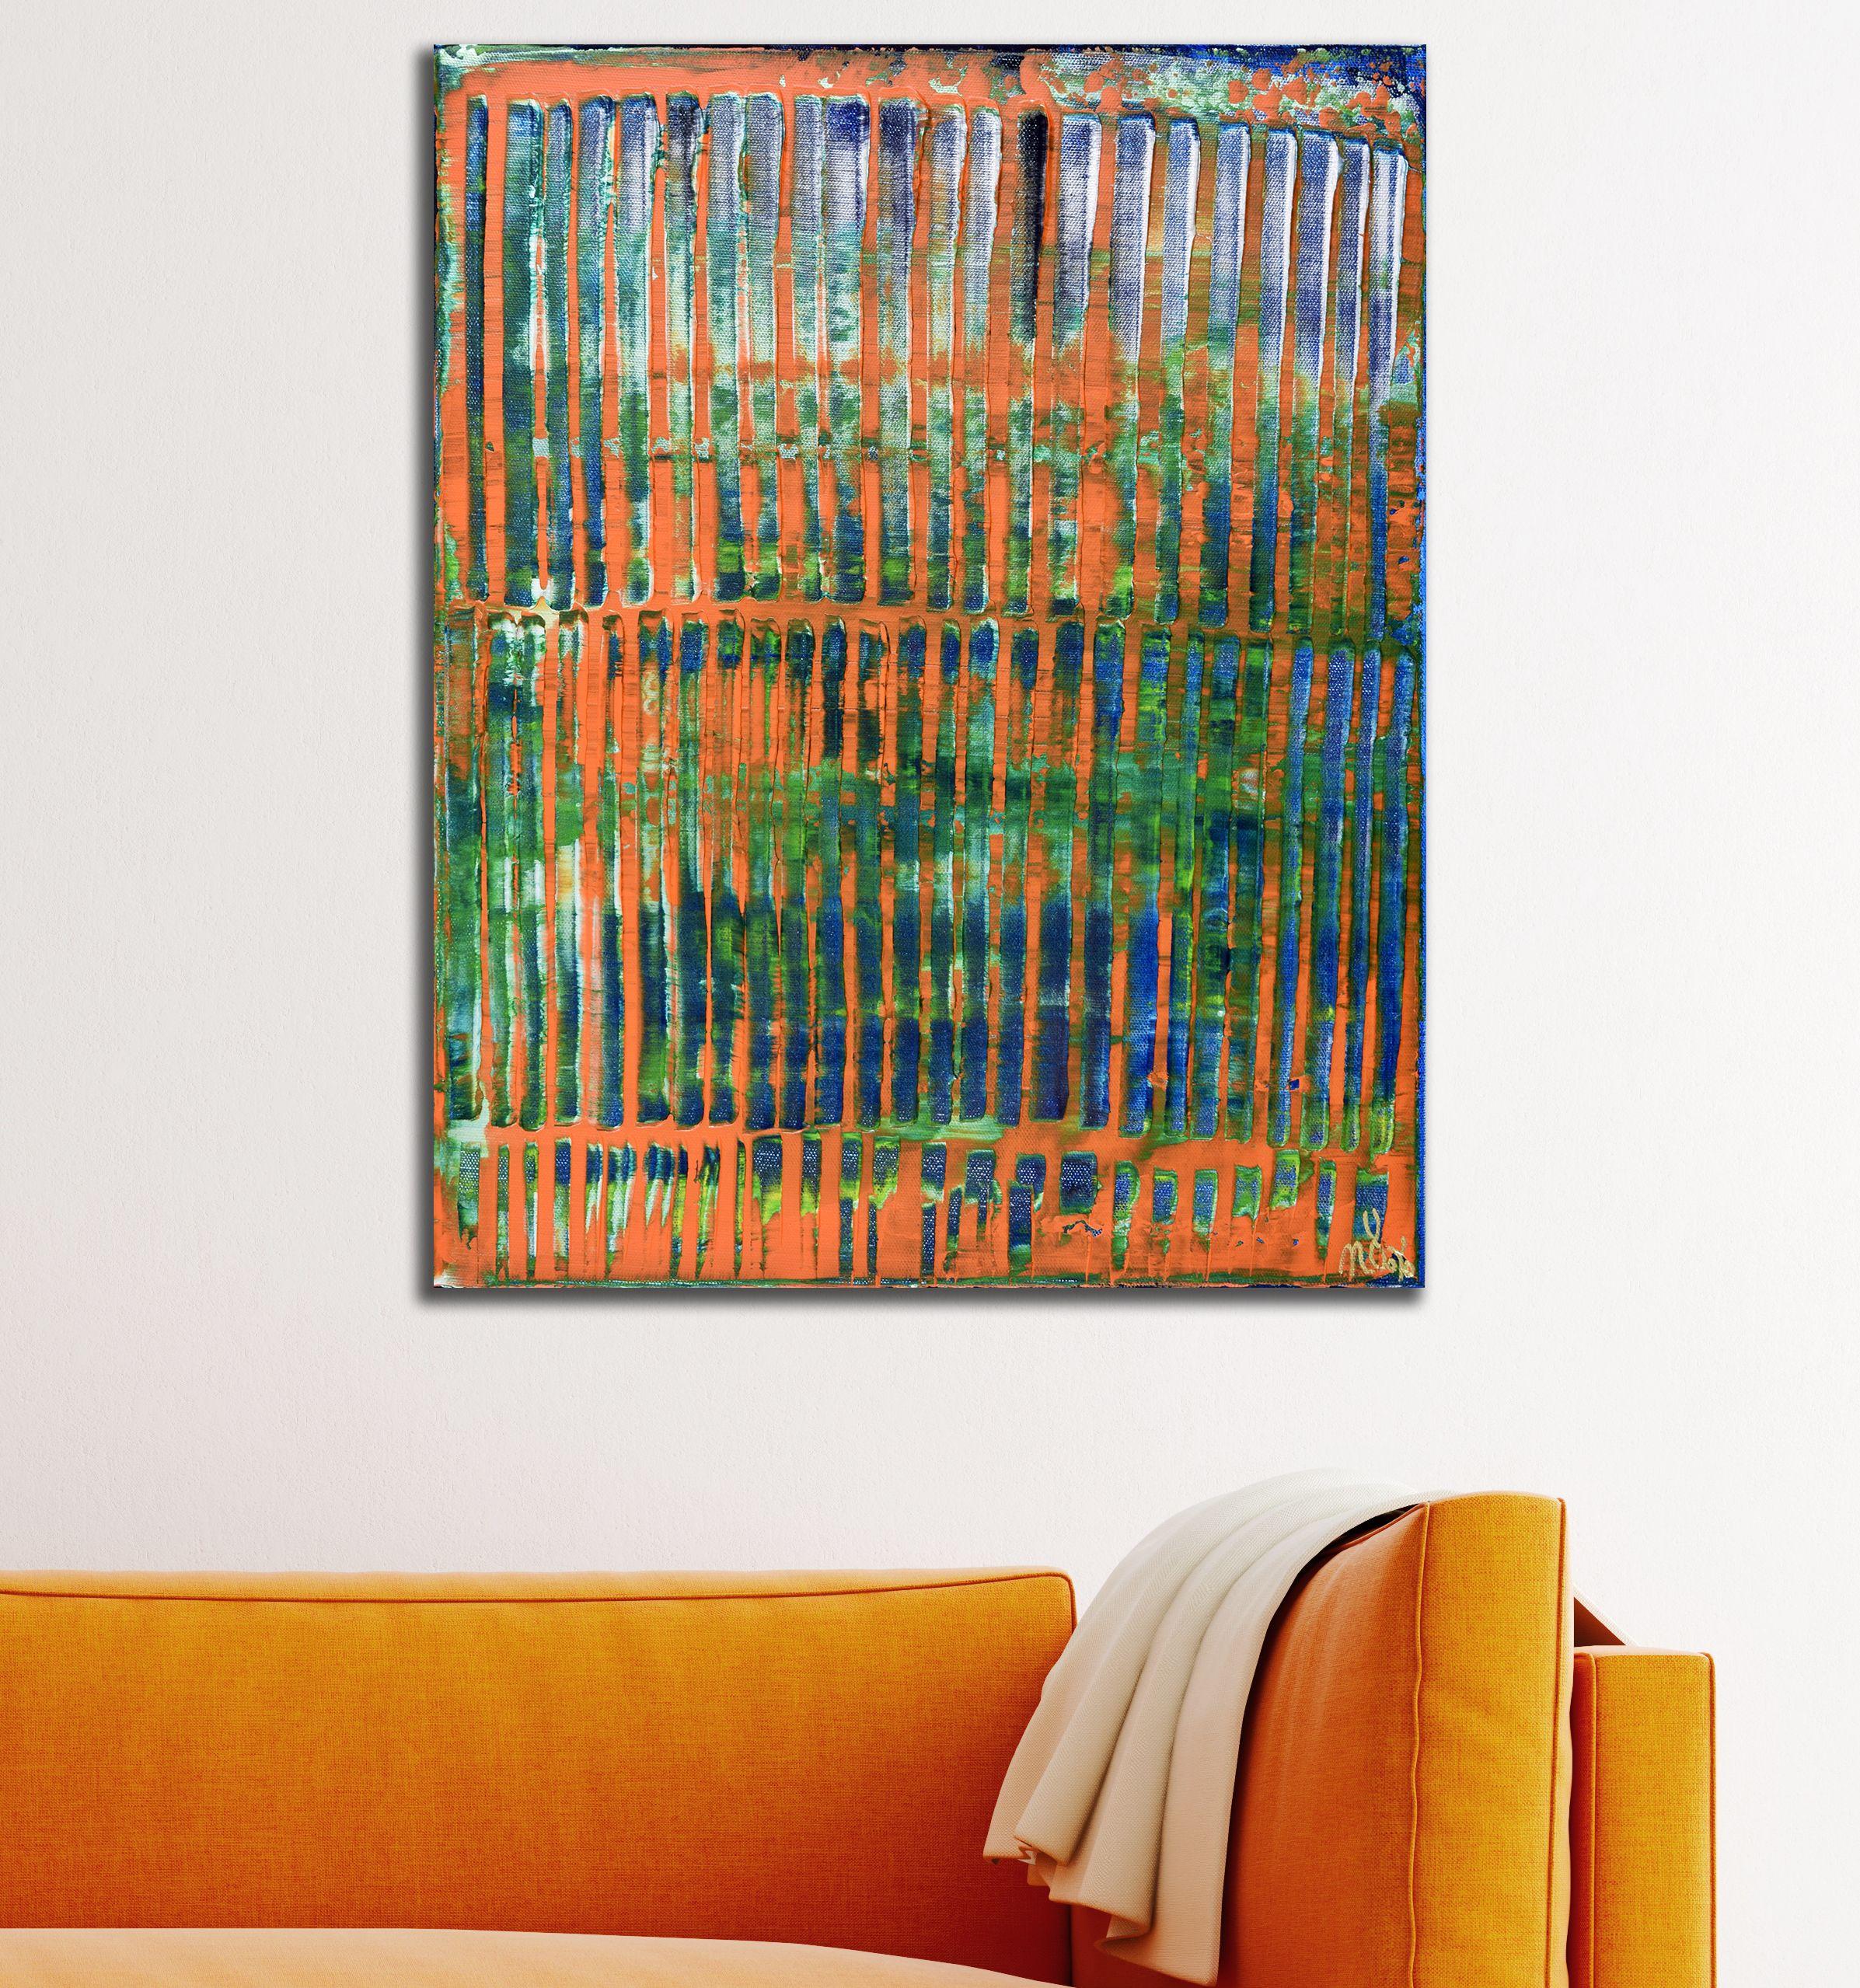 Mixed media acrylic and gouache (tempera) abstract colorfield with bold shades of orange, blue, silver and green undertones lots of light. This painting arrives mounted in a wooden canvas, sides painted, signed in front with 24k gold ink. Lots of